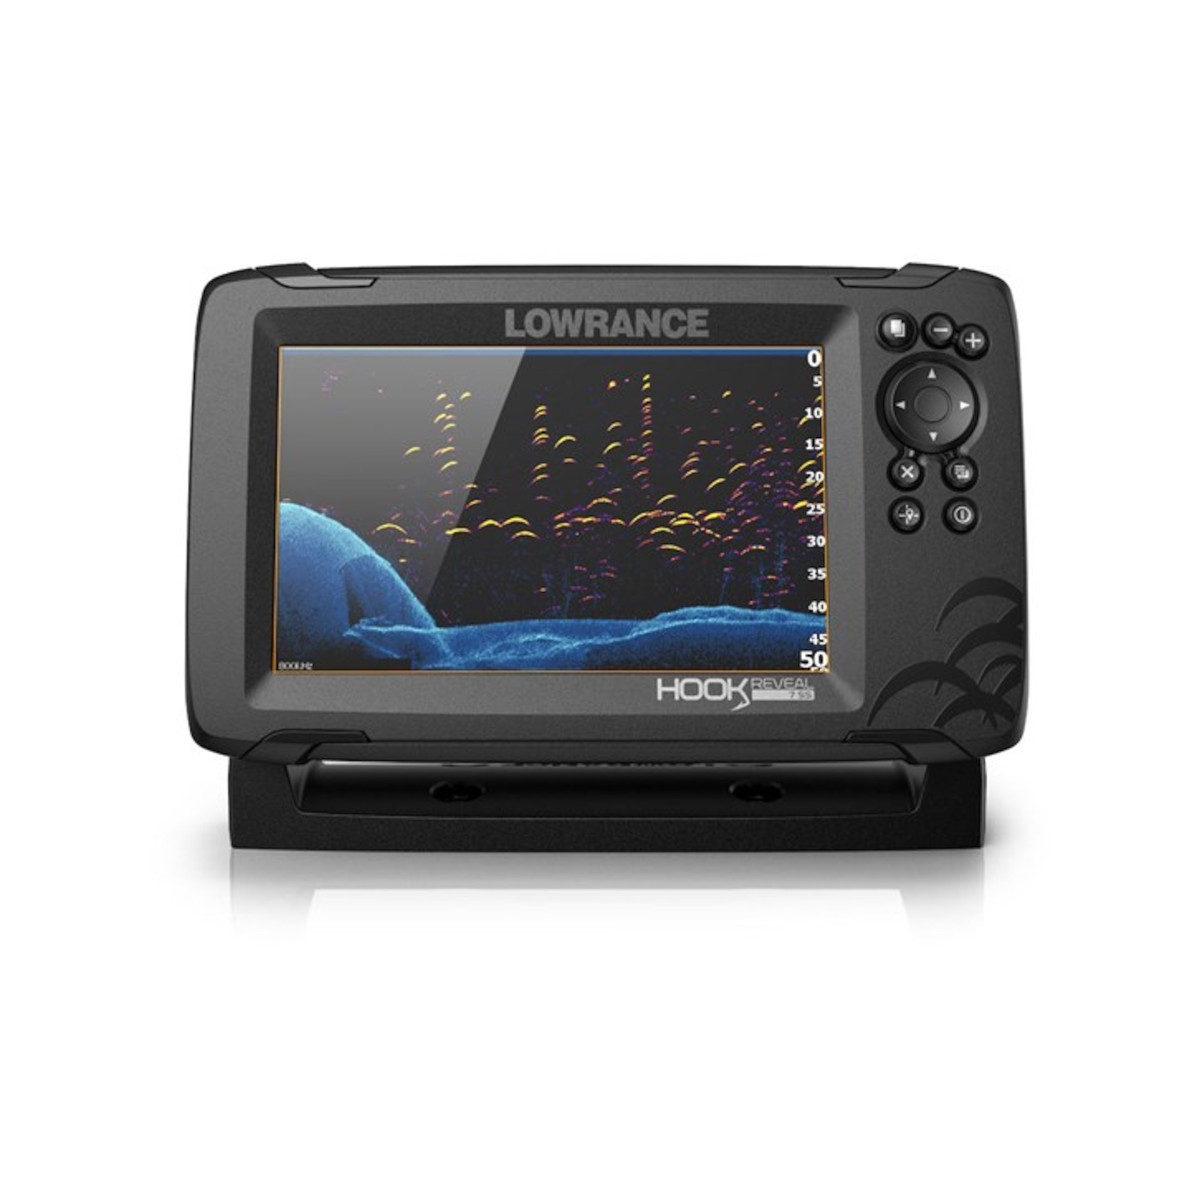 Lowrance HOOK Reveal 9 kaartplotter incl. 50/200 HDI transducer